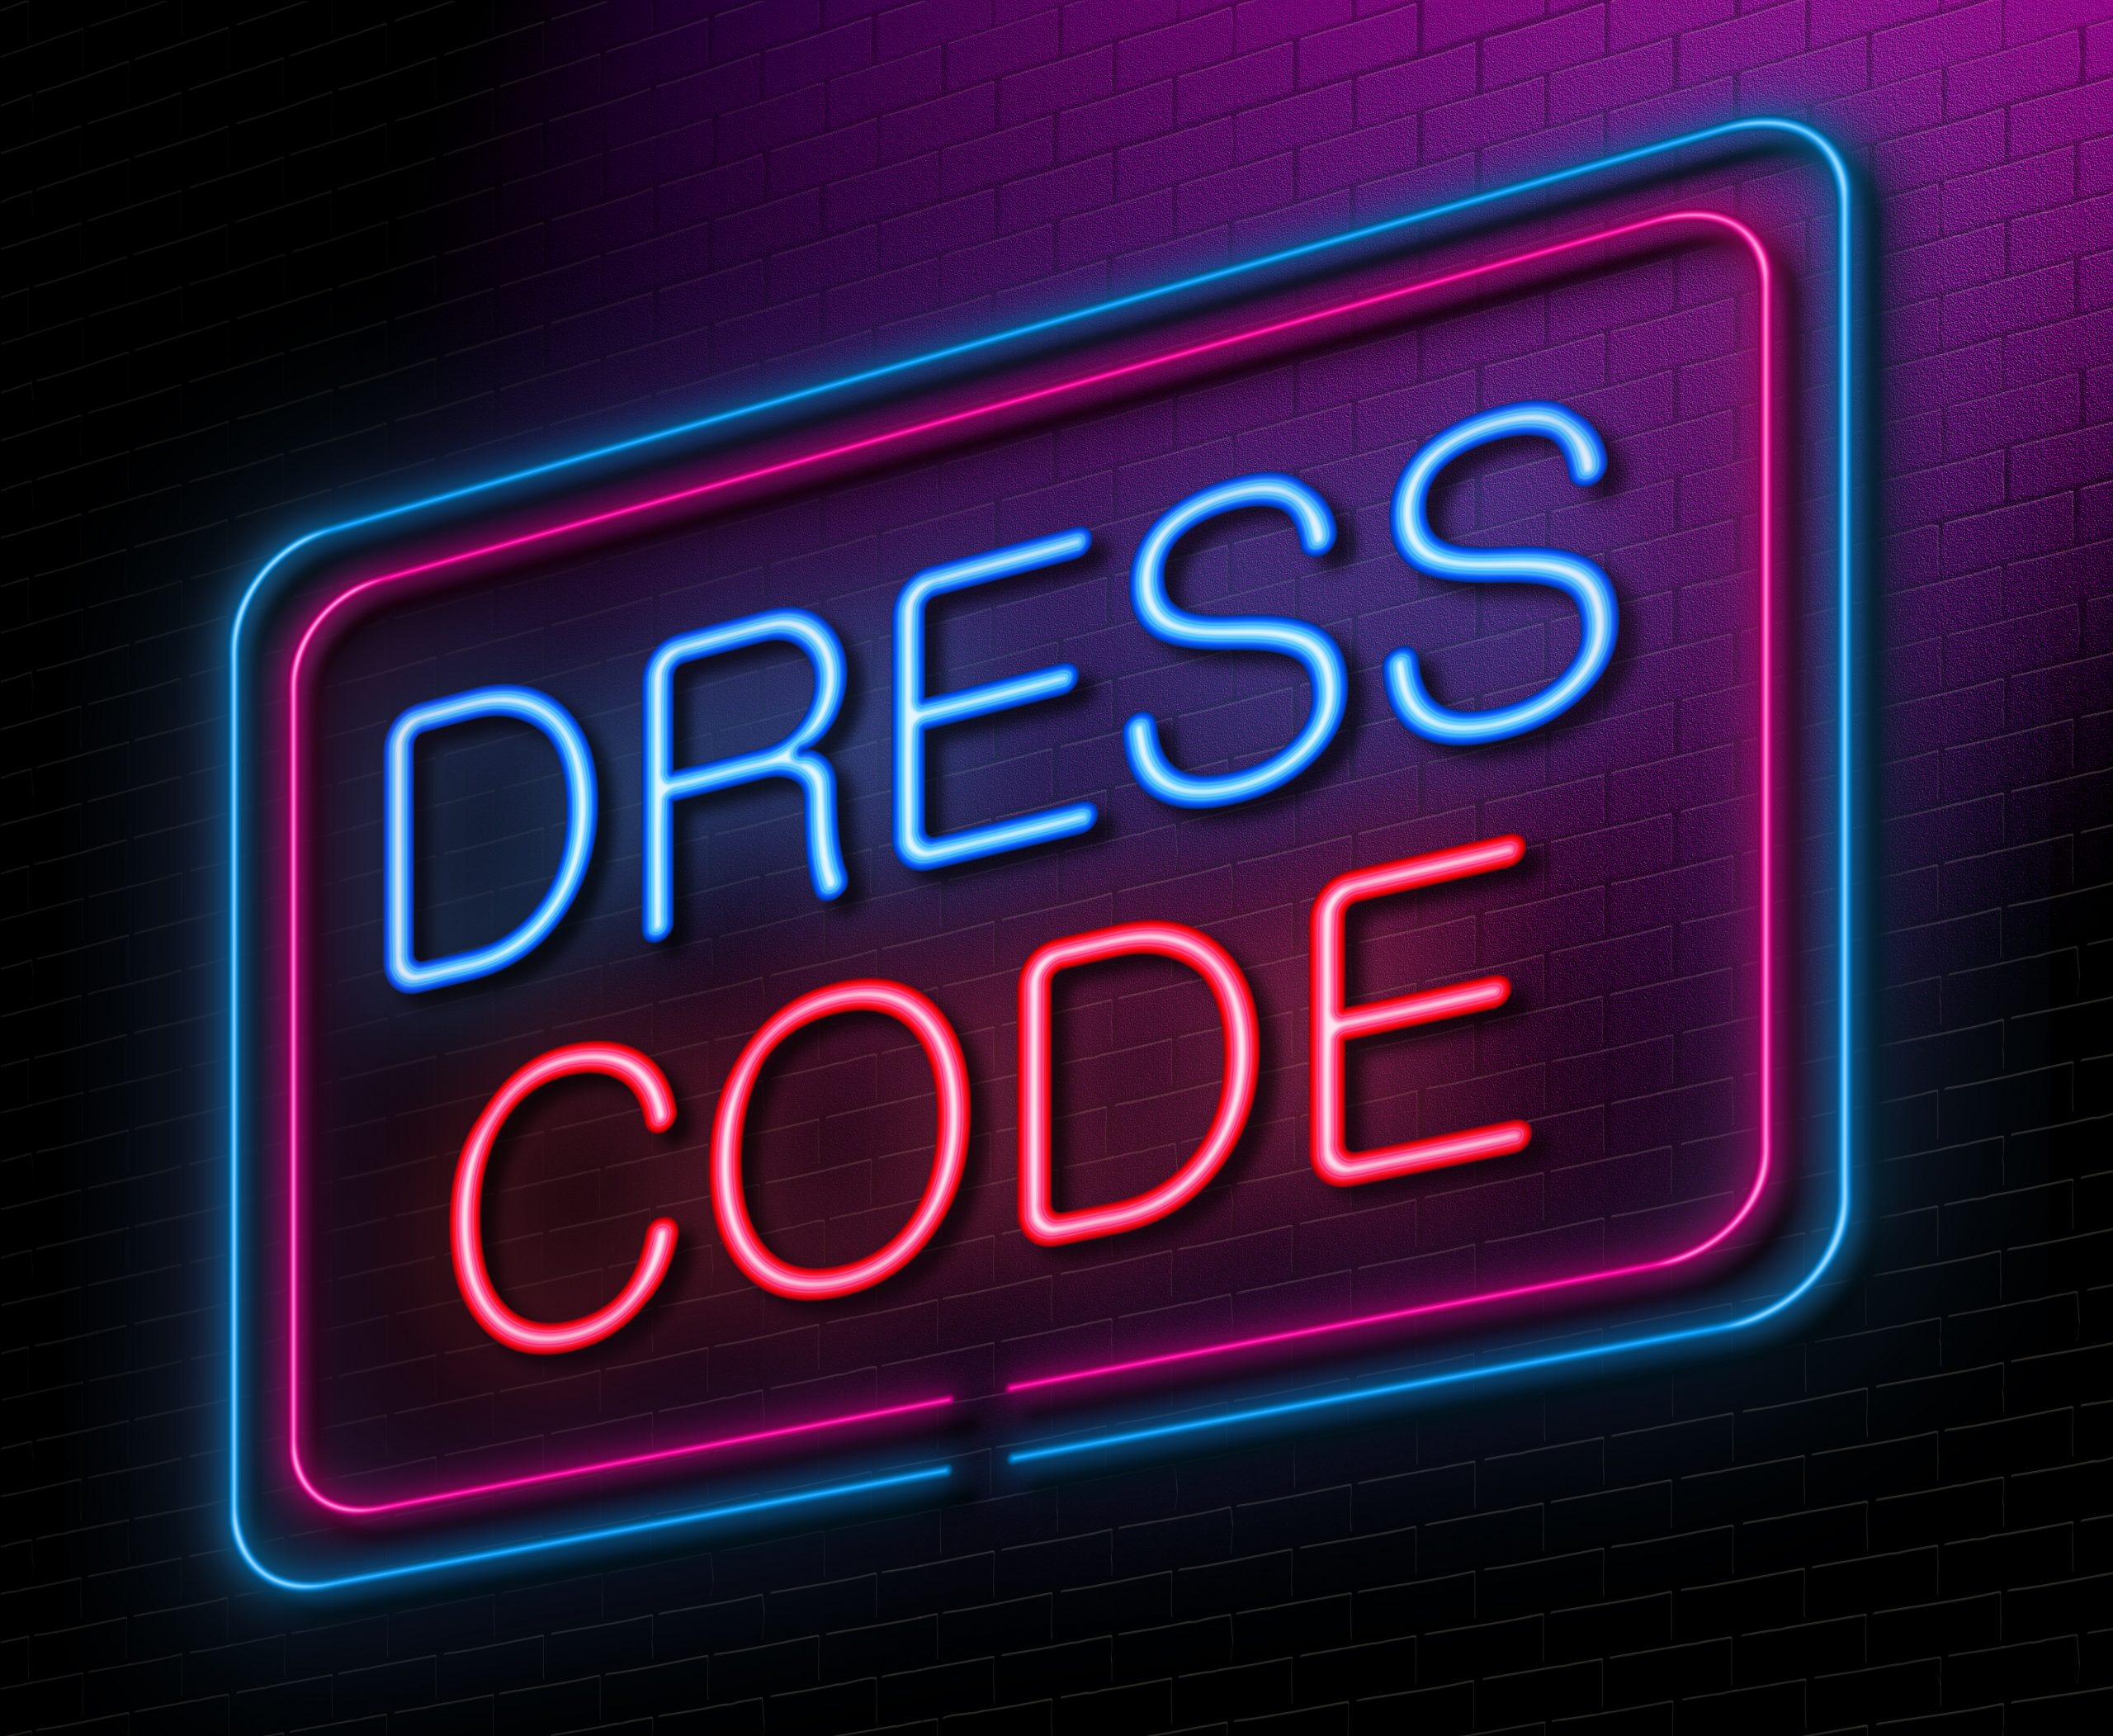 Illustration,Depicting,An,Illuminated,Neon,Sign,With,A,Dress,Code